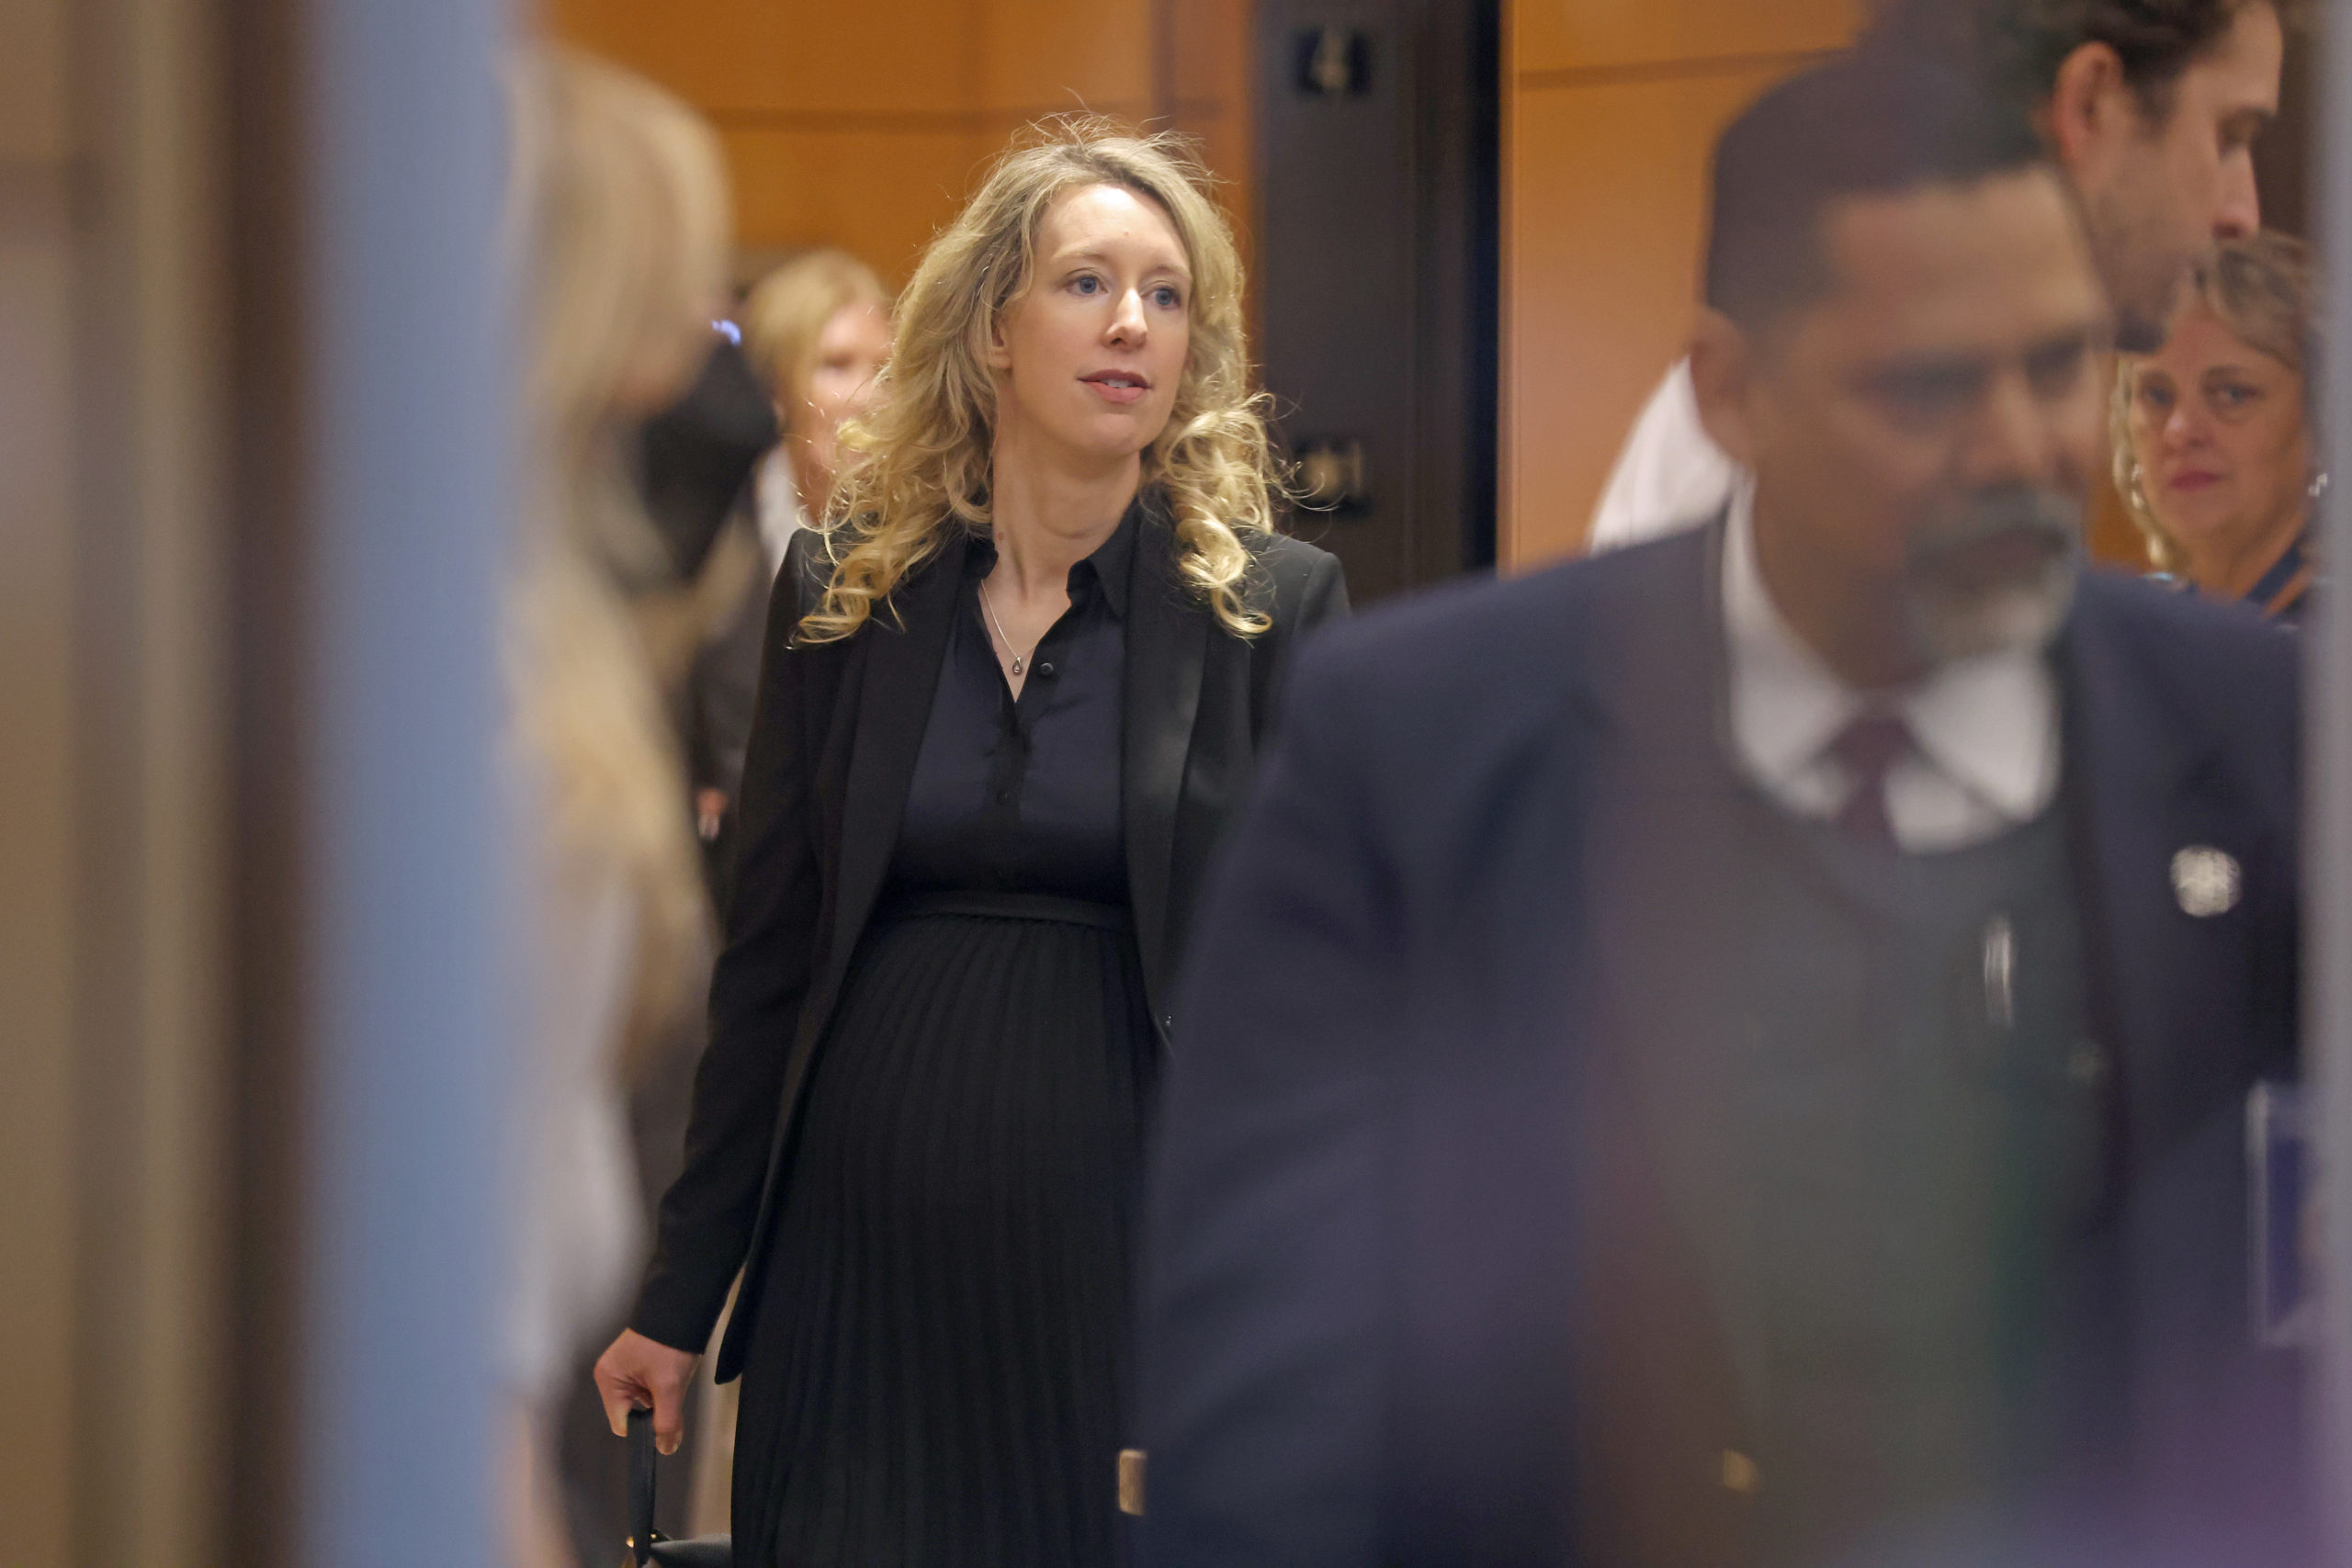 SAN JOSE, CALIFORNIA - NOVEMBER 18: Former Theranos CEO Elizabeth Holmes goes through a security checkpoint as she arrives at federal court on November 18, 2022 in San Jose, California. Holmes appeared in federal court for sentencing after being convicted of four counts of fraud for allegedly engaging in a multimillion-dollar scheme to defraud investors in her company Theranos, which offered blood testing lab services. (Photo by Justin Sullivan/Getty Images)